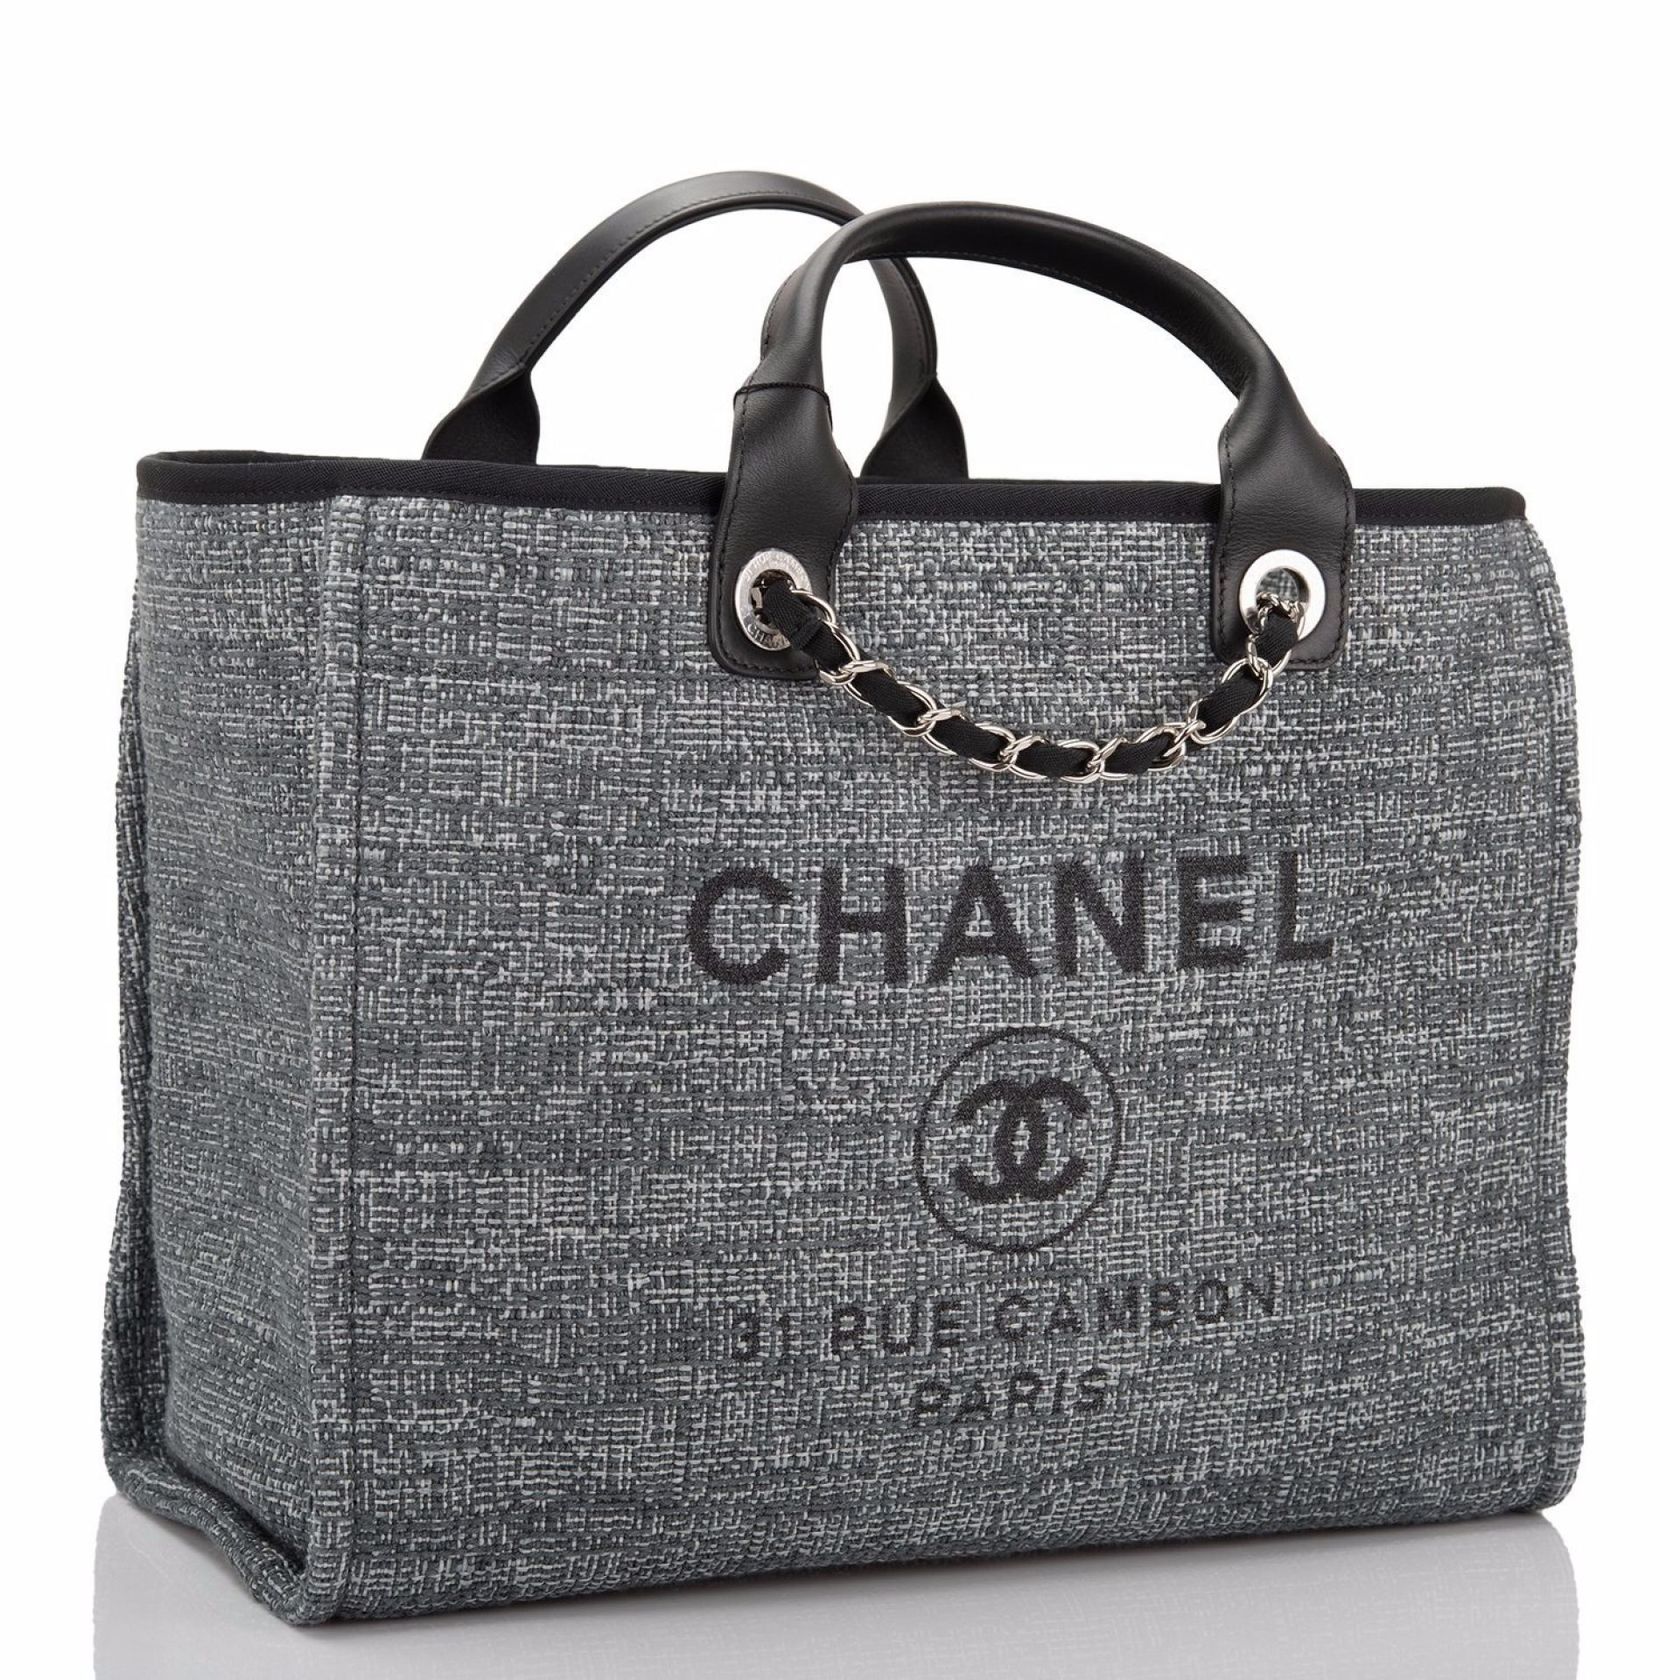 Chanel Deauville Tote Price How do you Price a Switches?